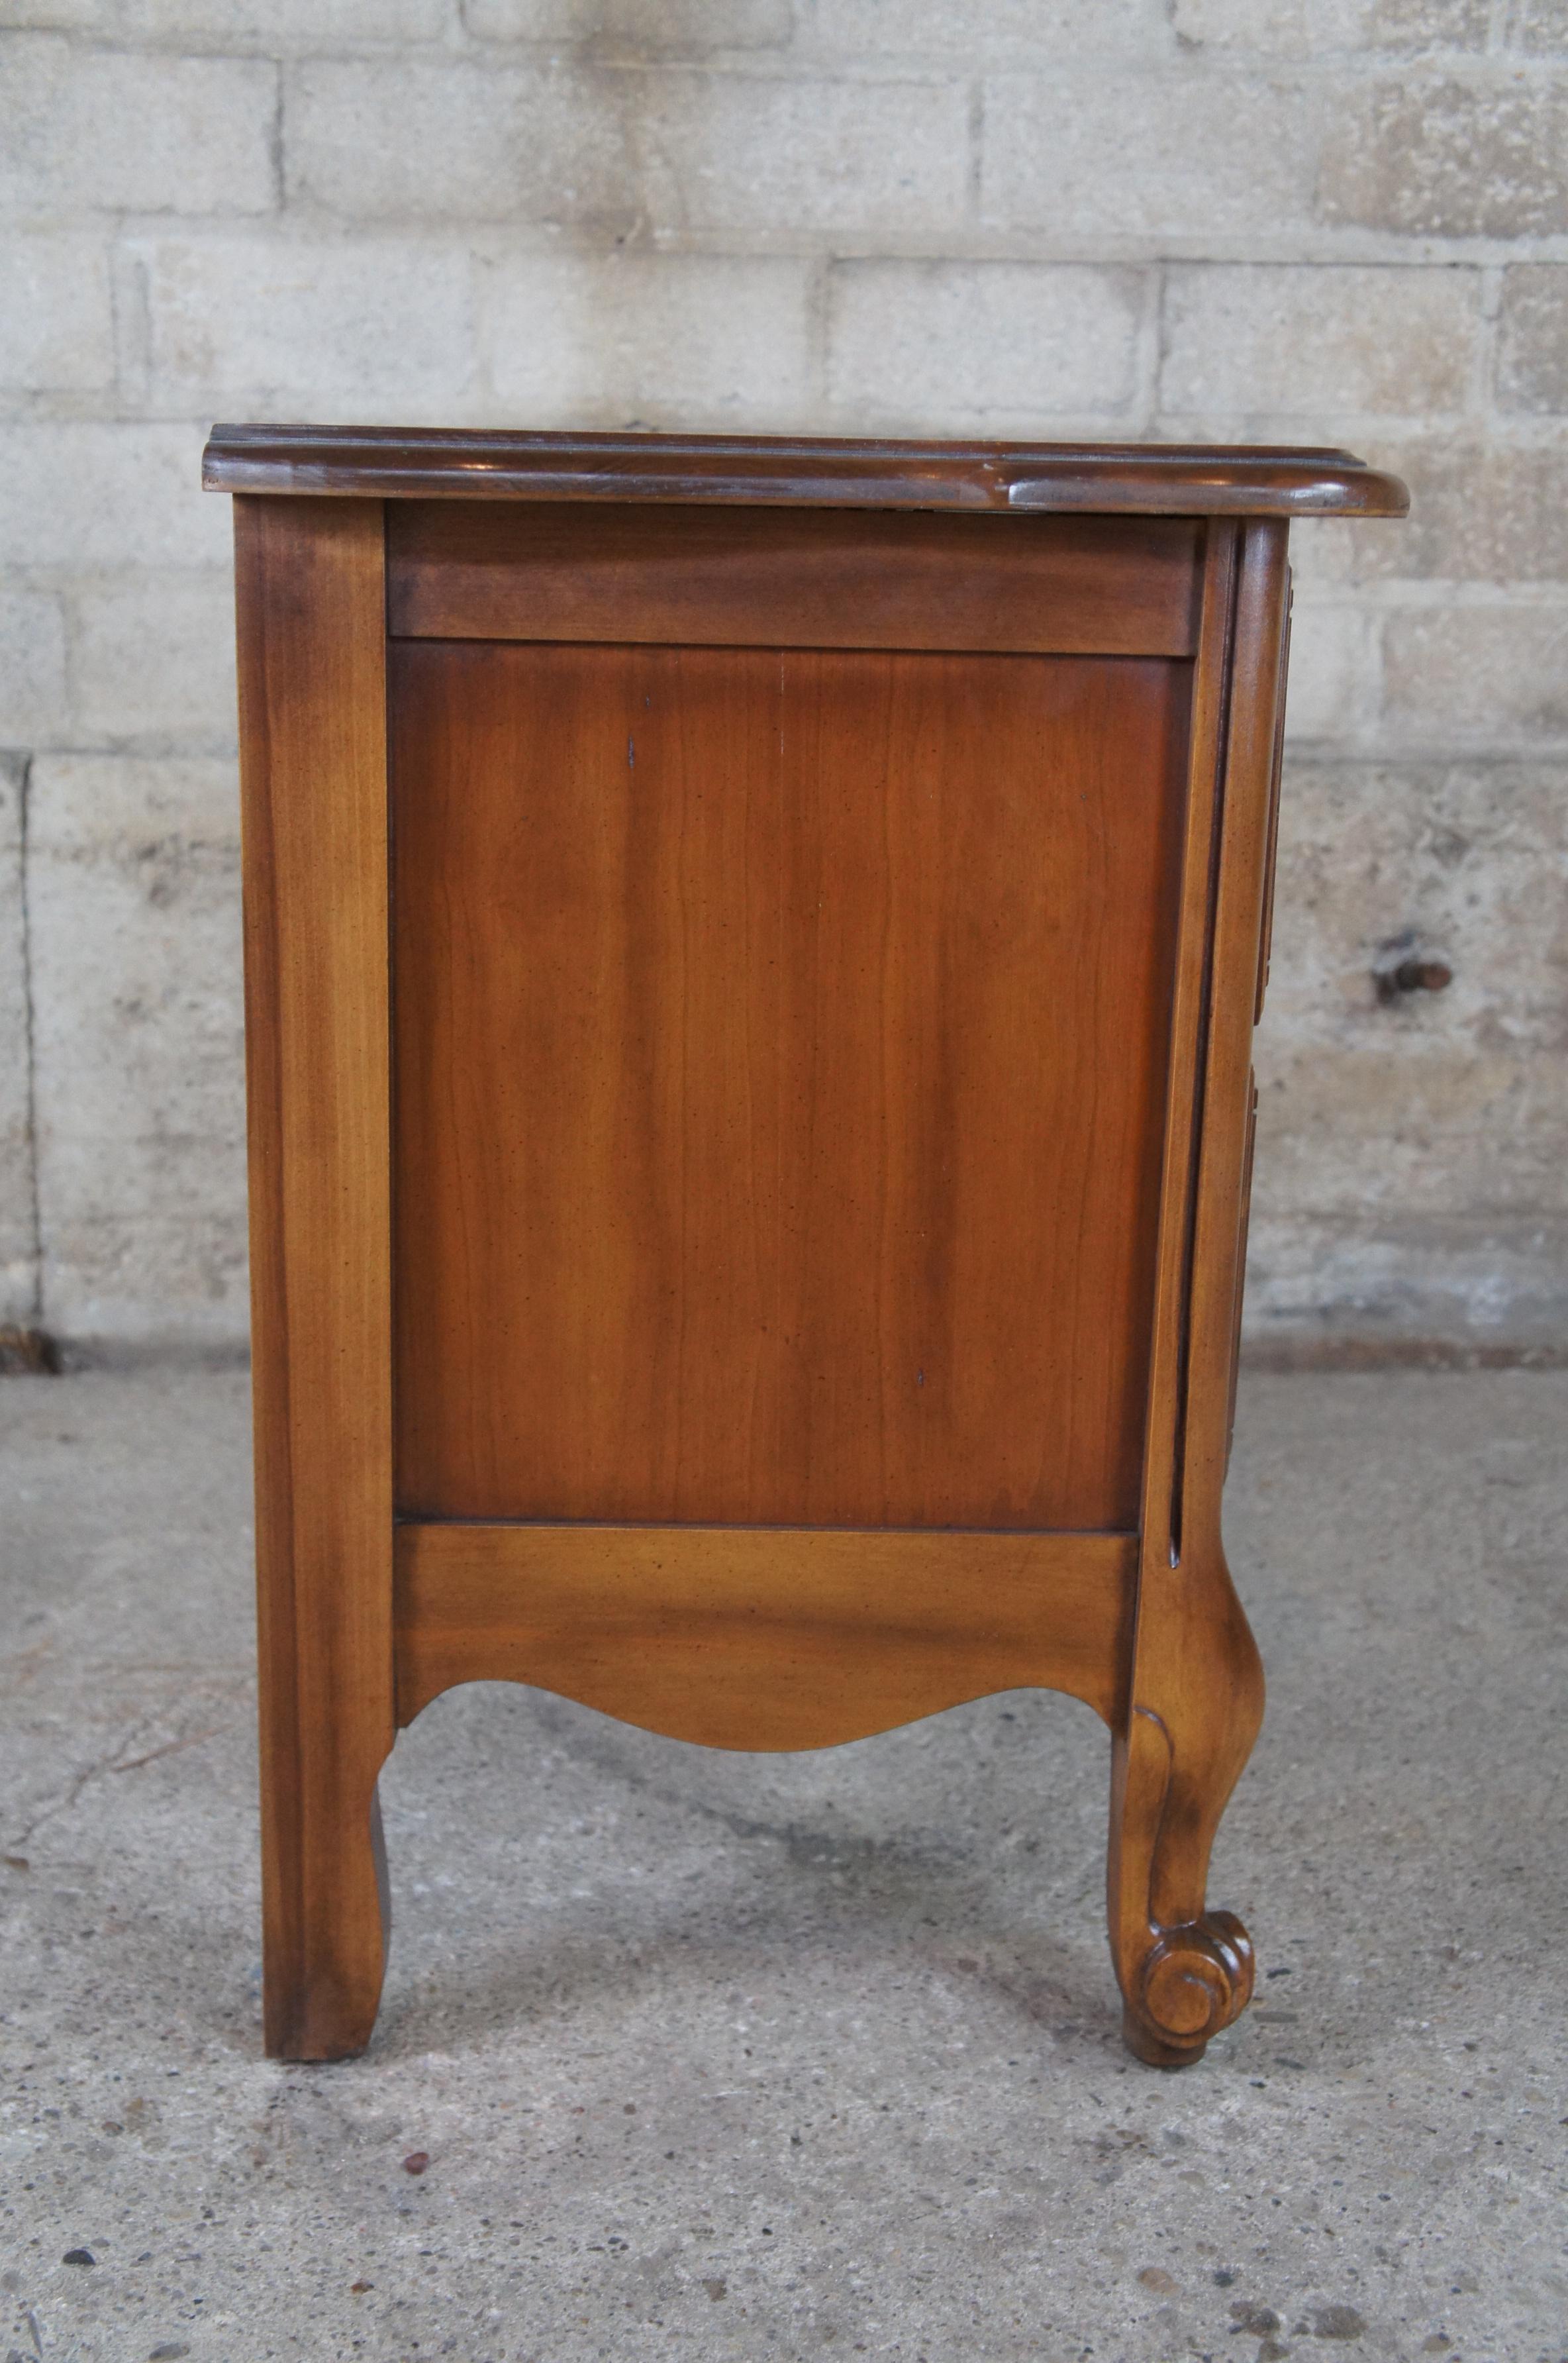 Kent Coffey Marquee French Fruitwood Nightstand Dresser Side Table Provincial 1